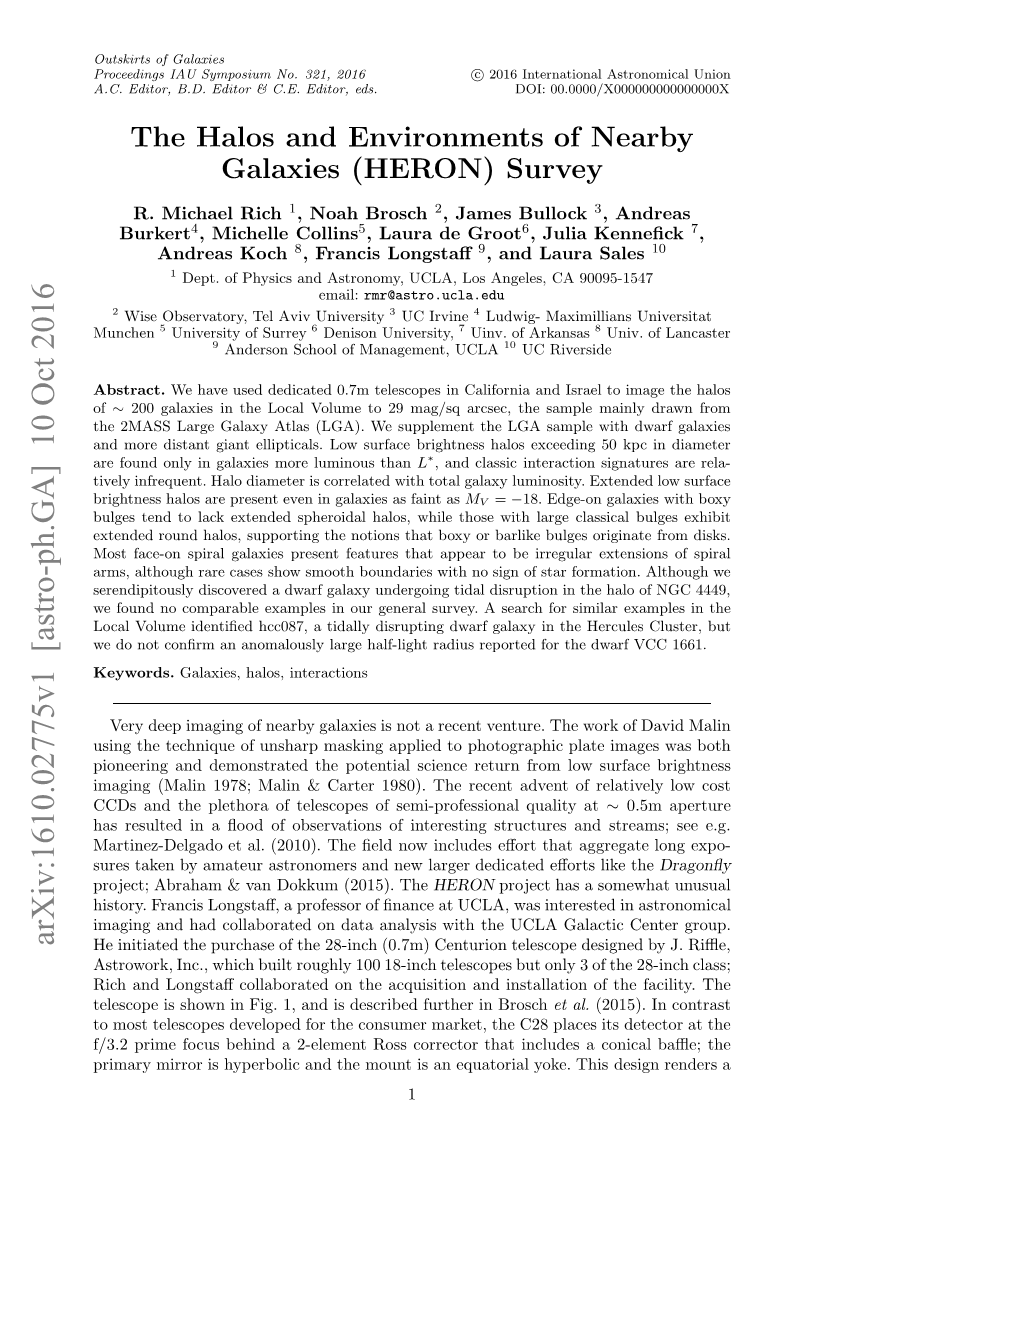 The Halos and Environments of Nearby Galaxies (HERON) Survey